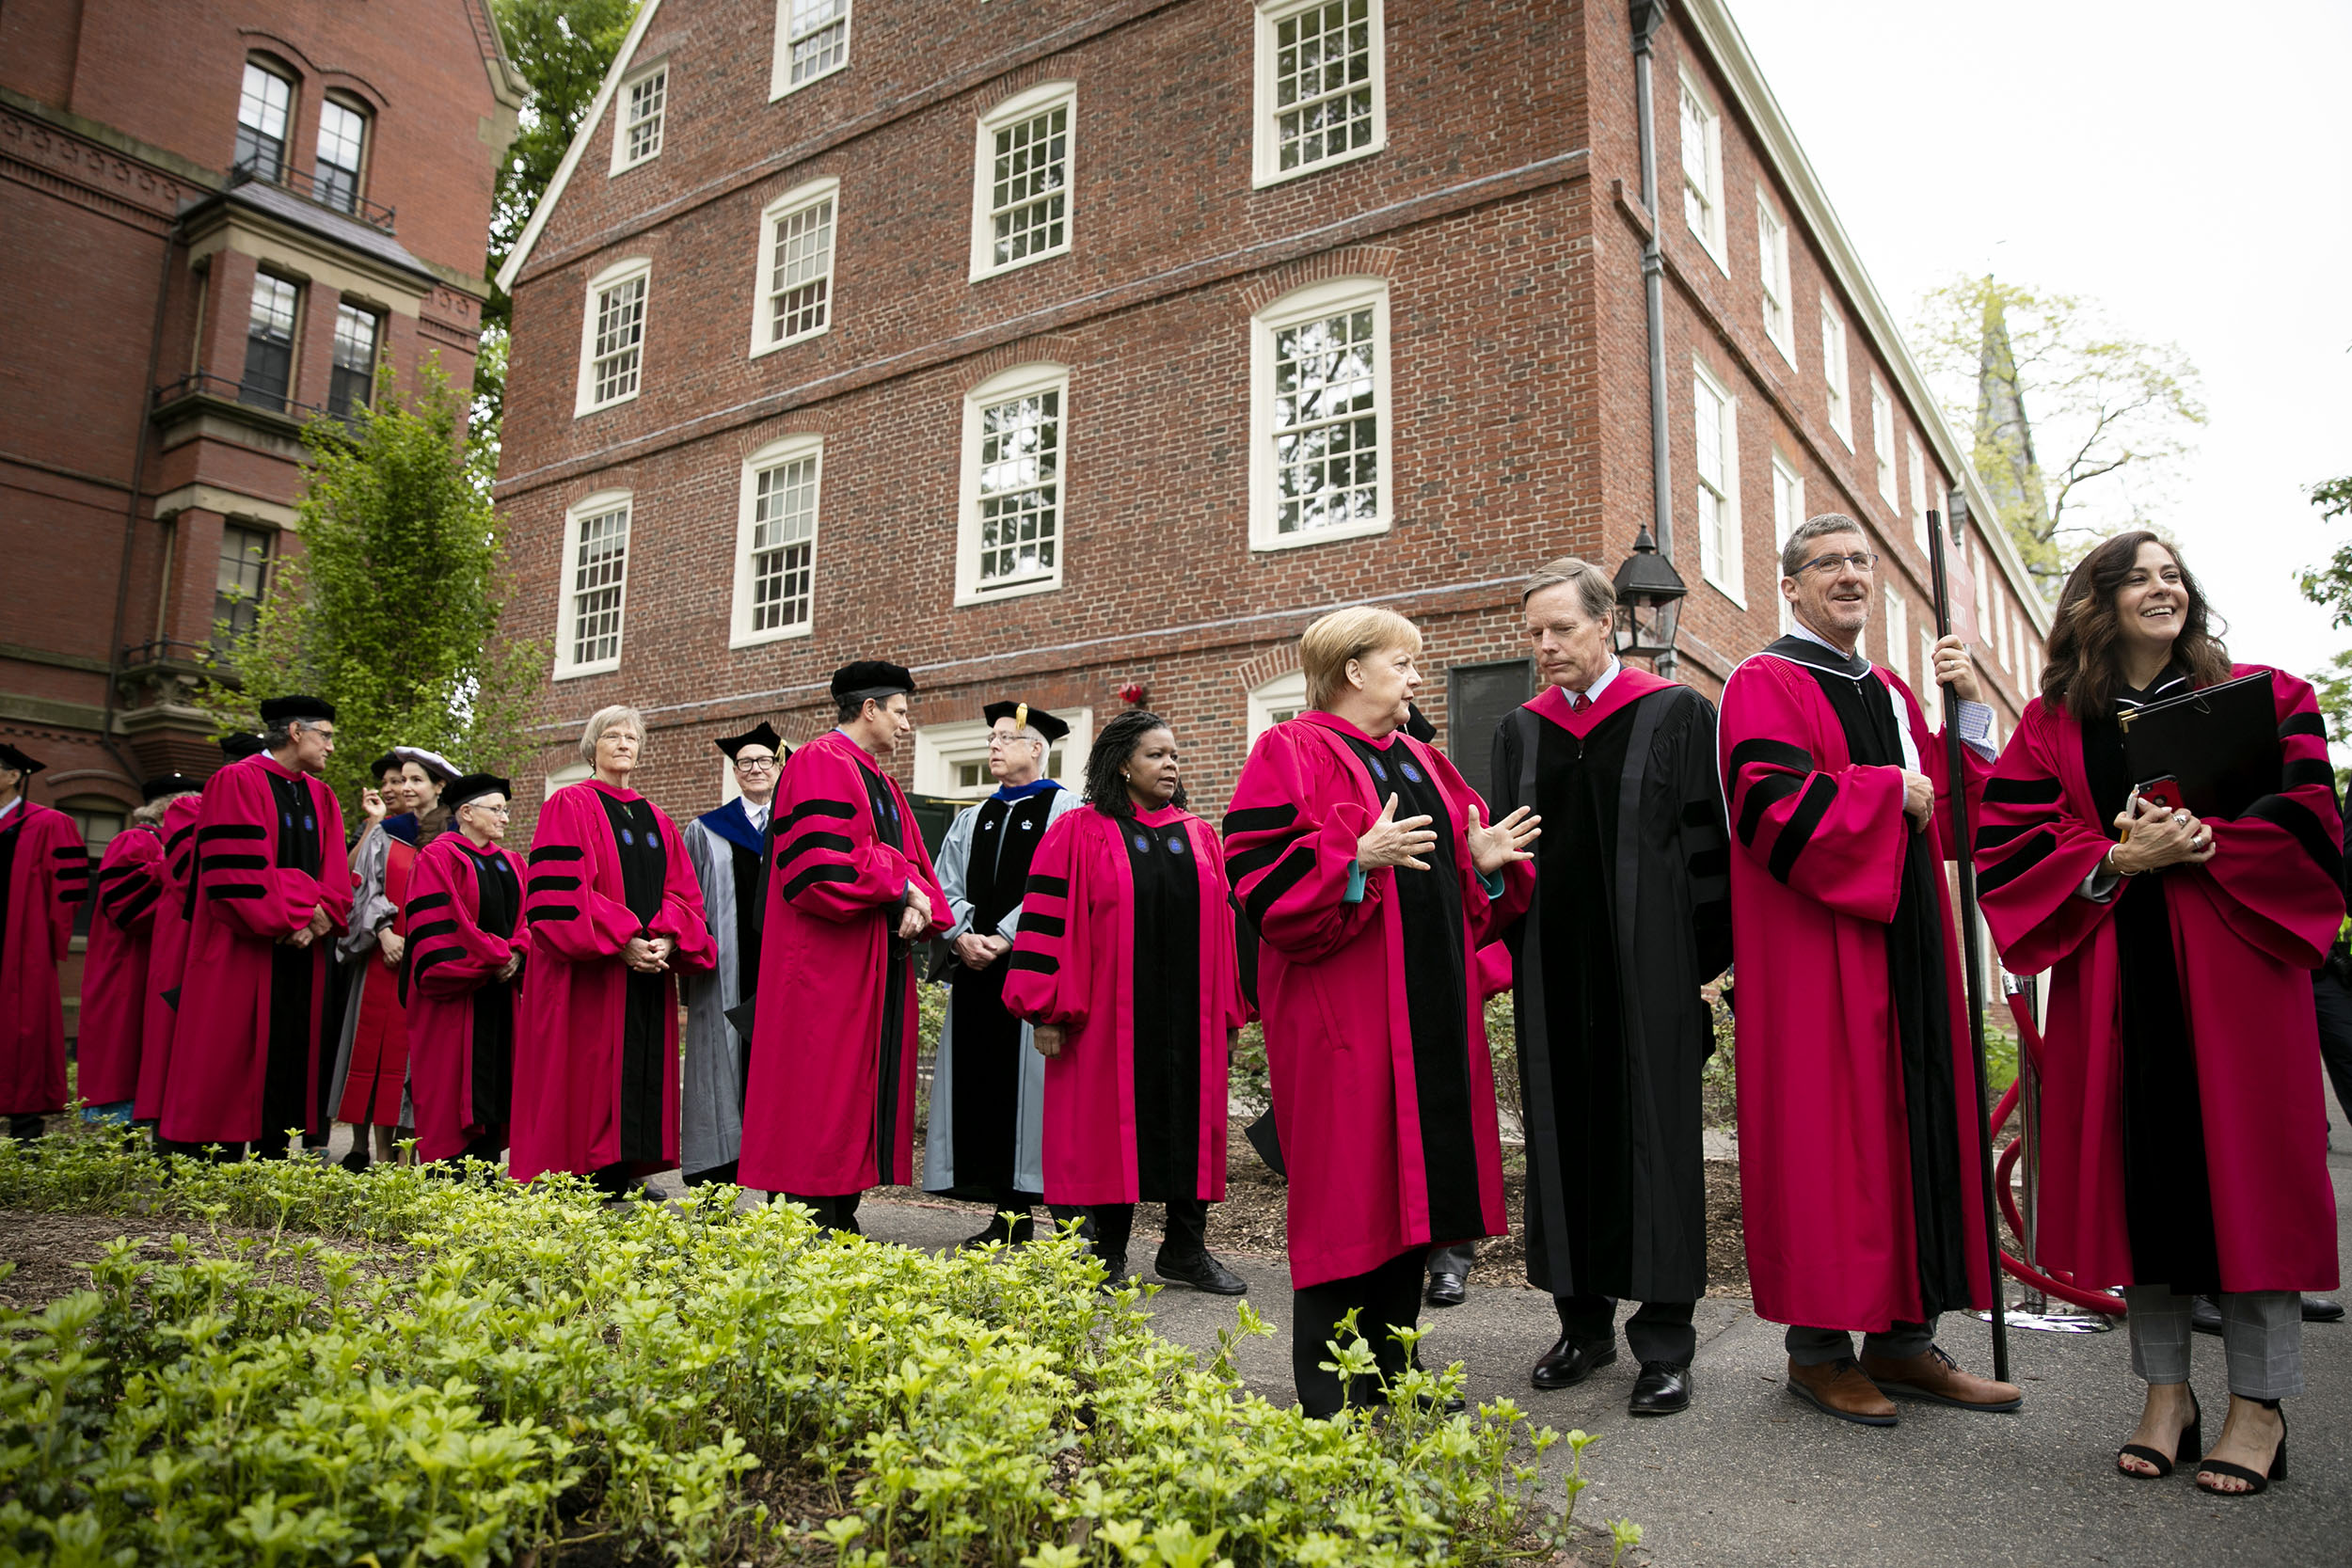 Honorary degree recipients and their escorts line up outside Massachusetts Hall.